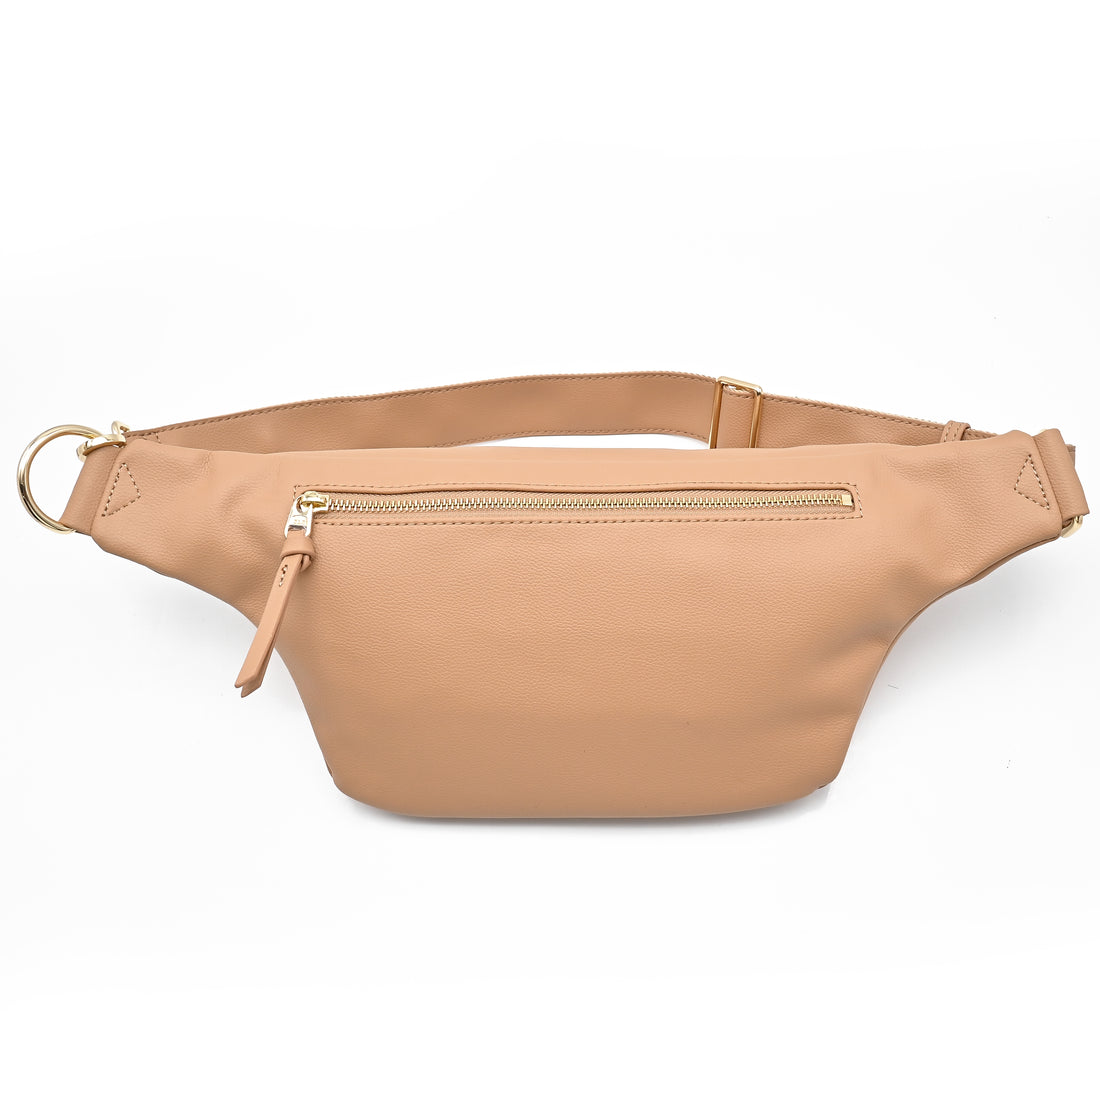 Better Than A Fanny Pack- Navy – IndigoLaine&Co